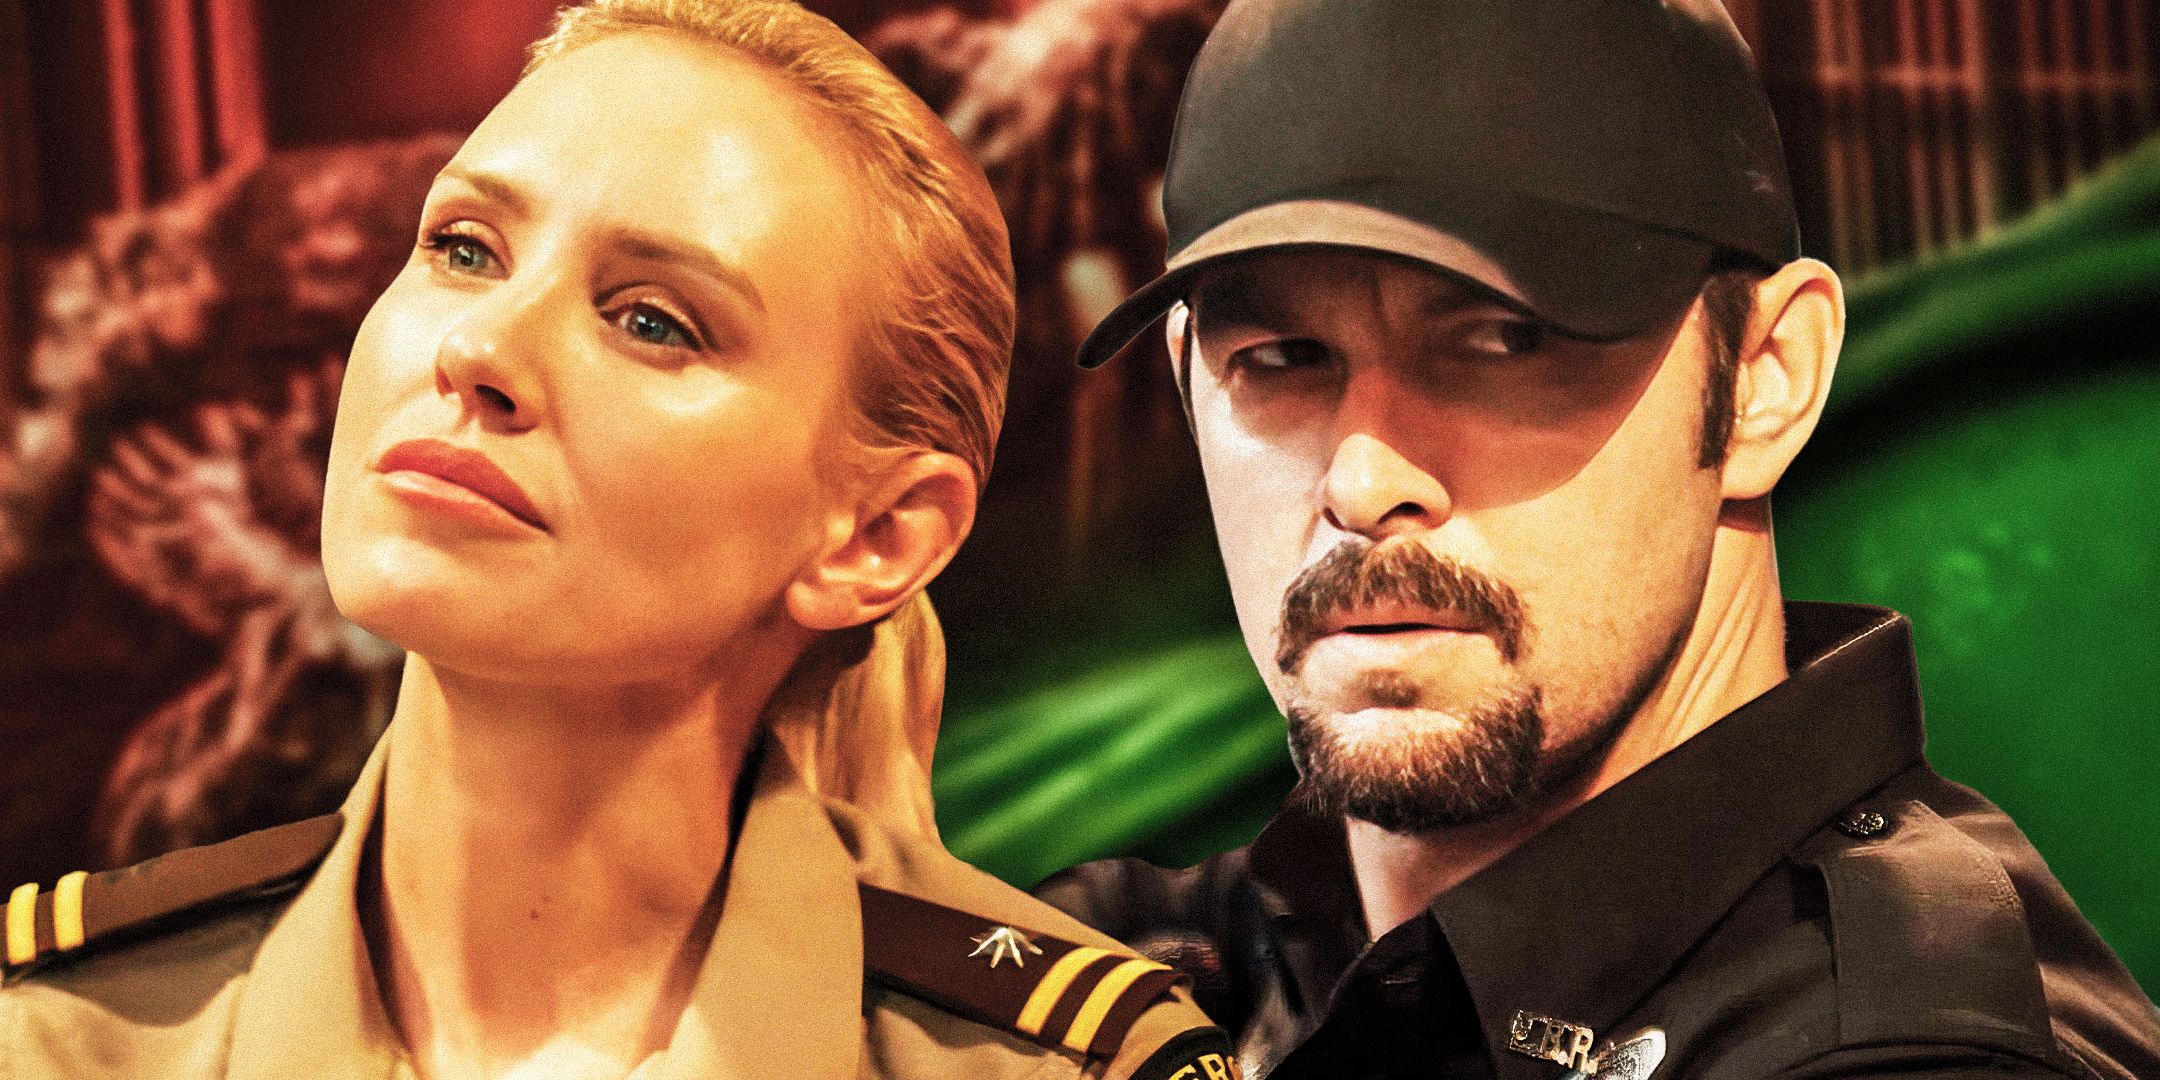 Ryan Francis as Jay Stamper and Nicky Whelan as Sheriff Jo Newman from The Flood